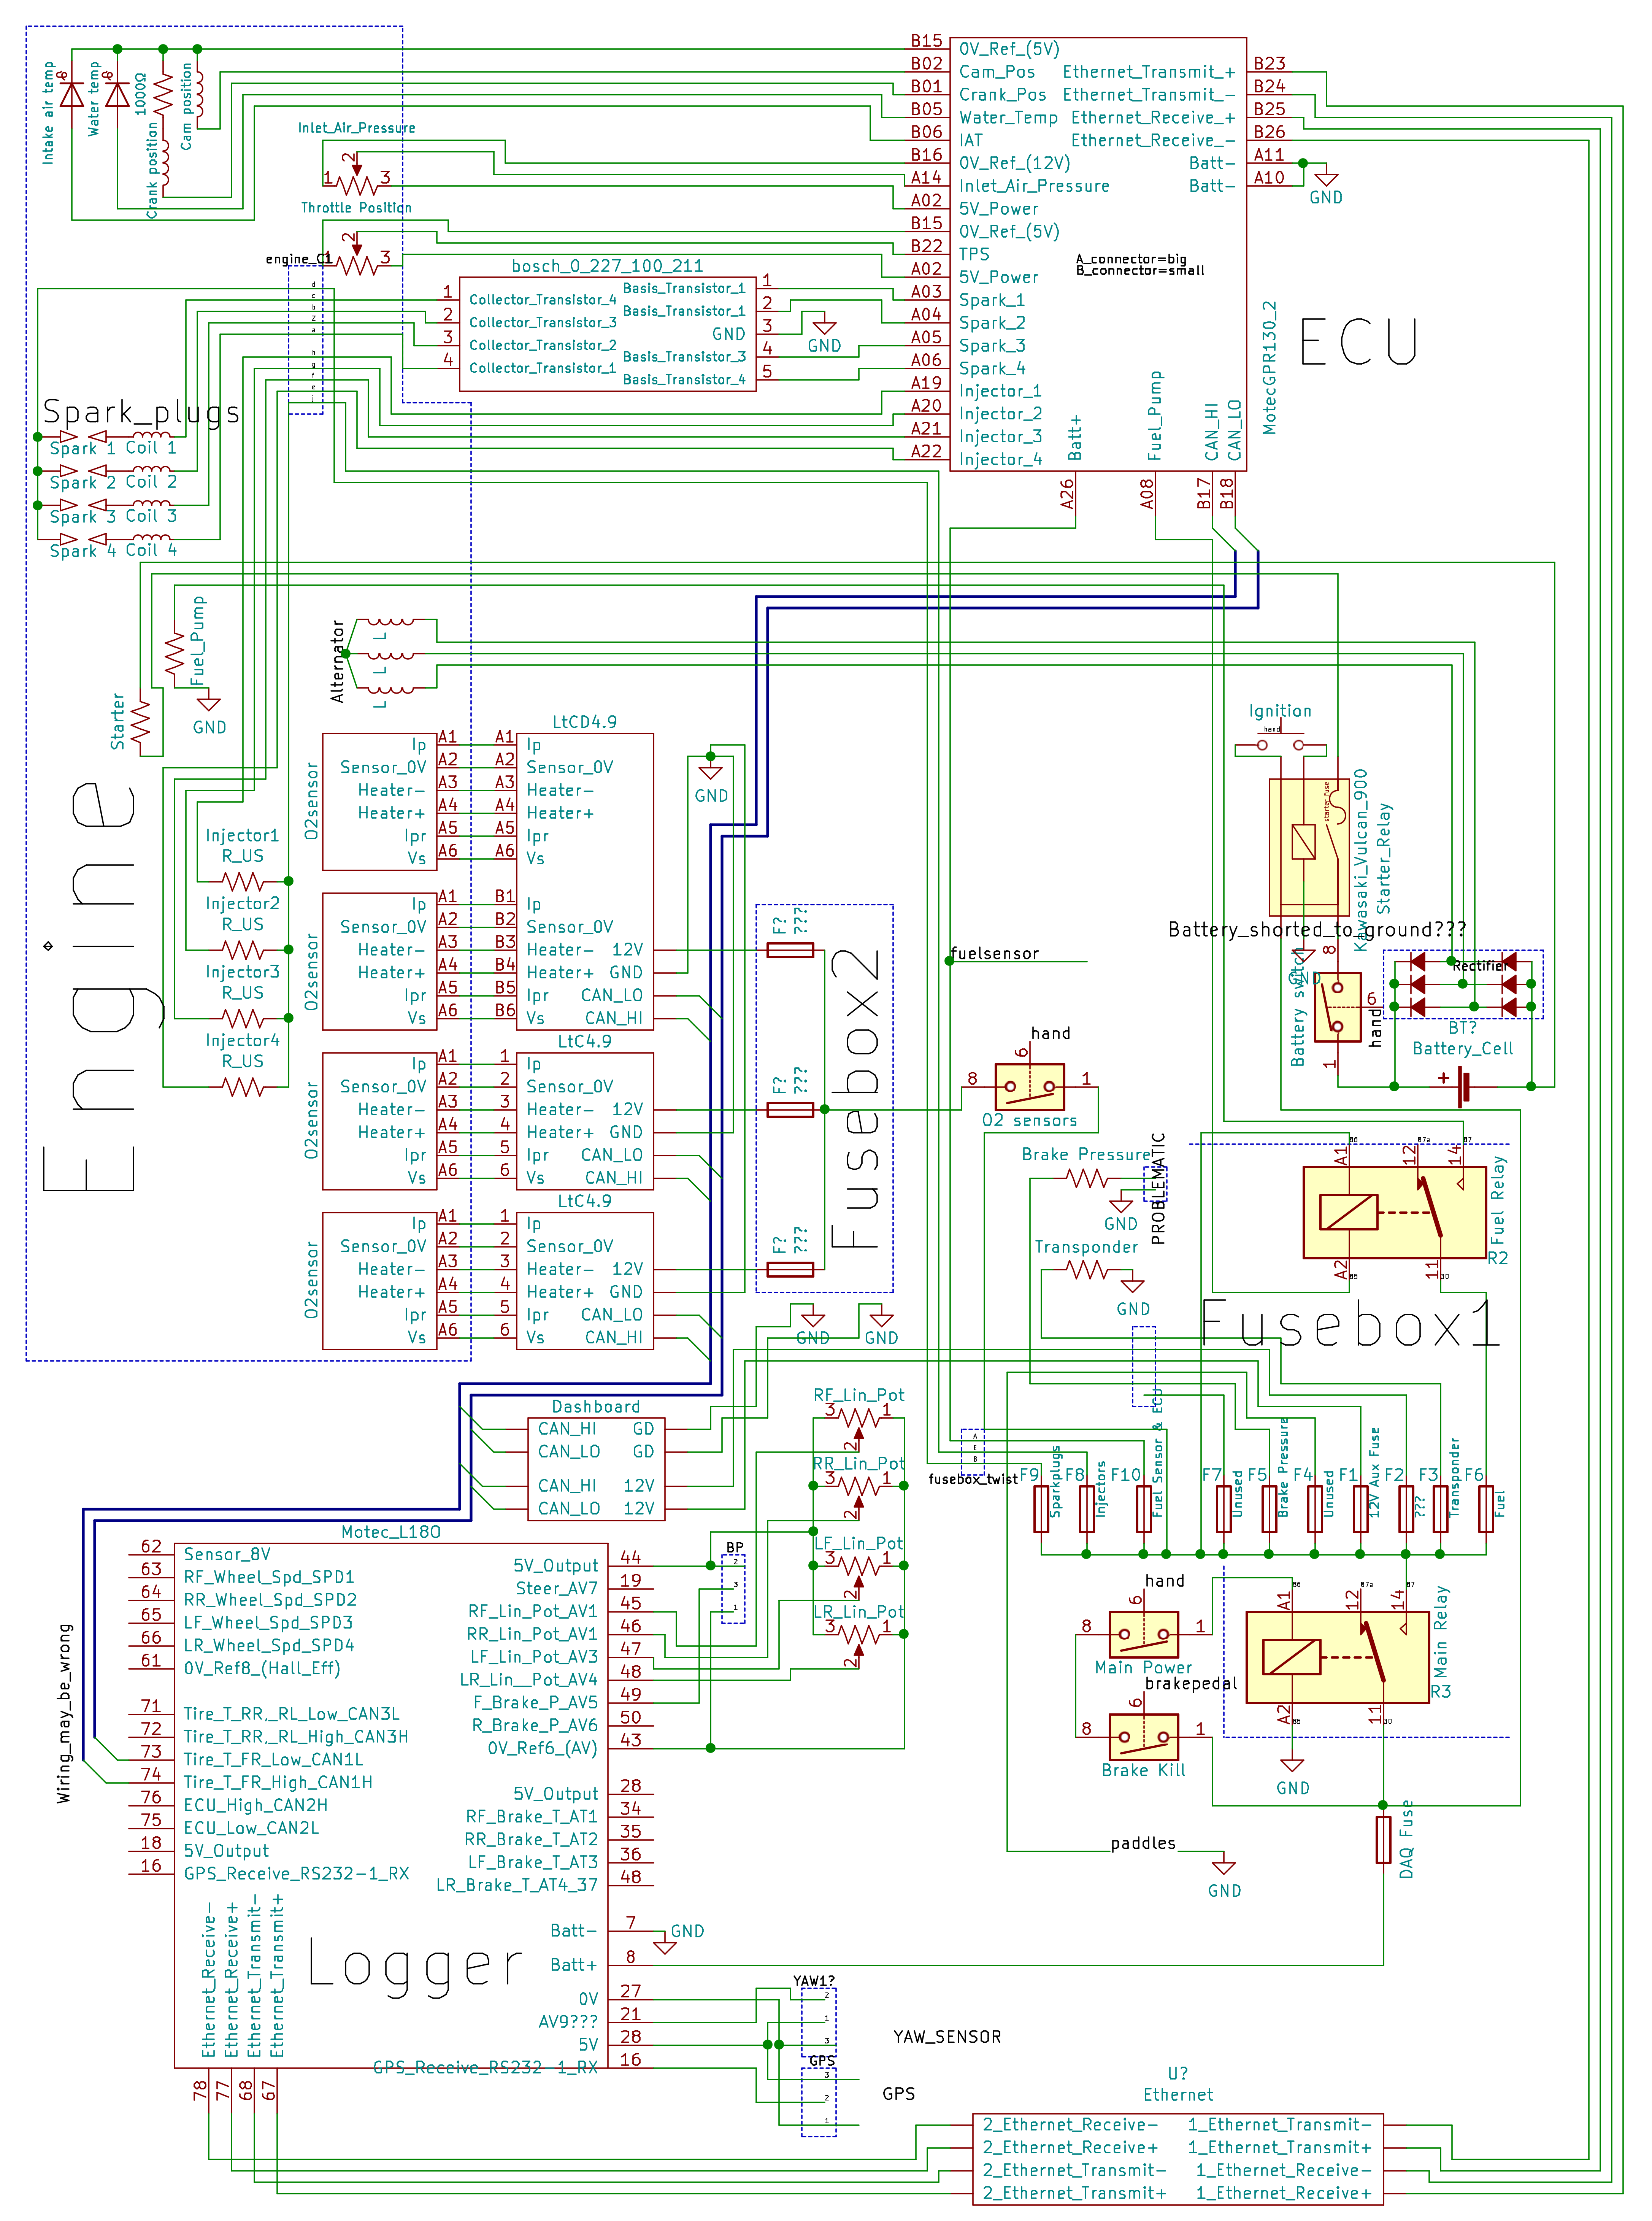 The wiring schematic for the Columbia University Formula Racing Internal Combustion Engine racecar